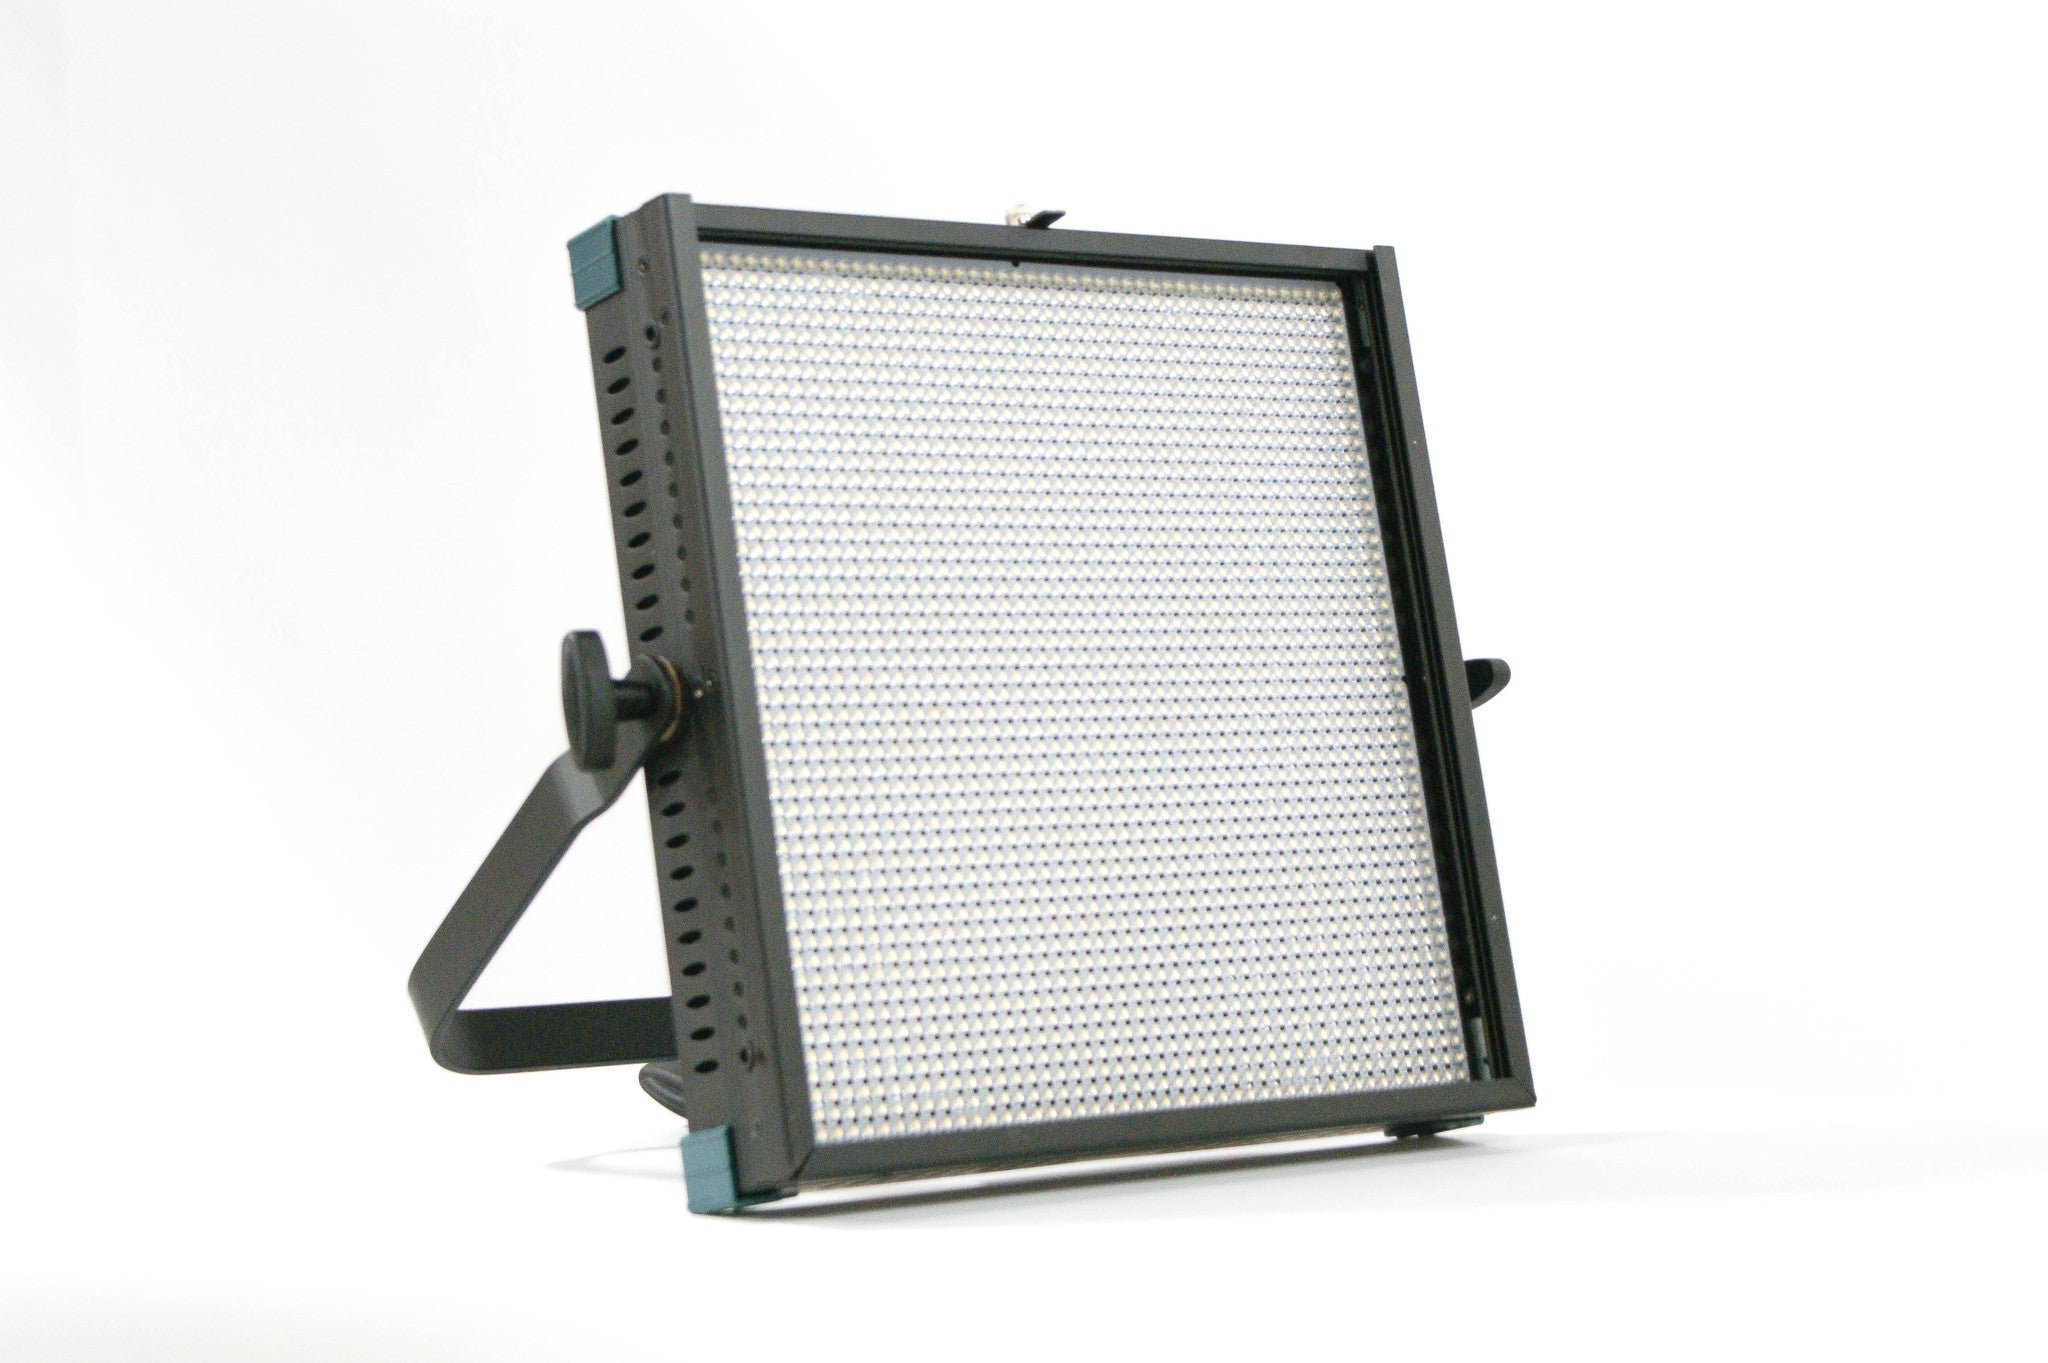 Two Light Kit - 1x1 Panels, 50W & 100W With Batteries (gold mount or v-mount) for video